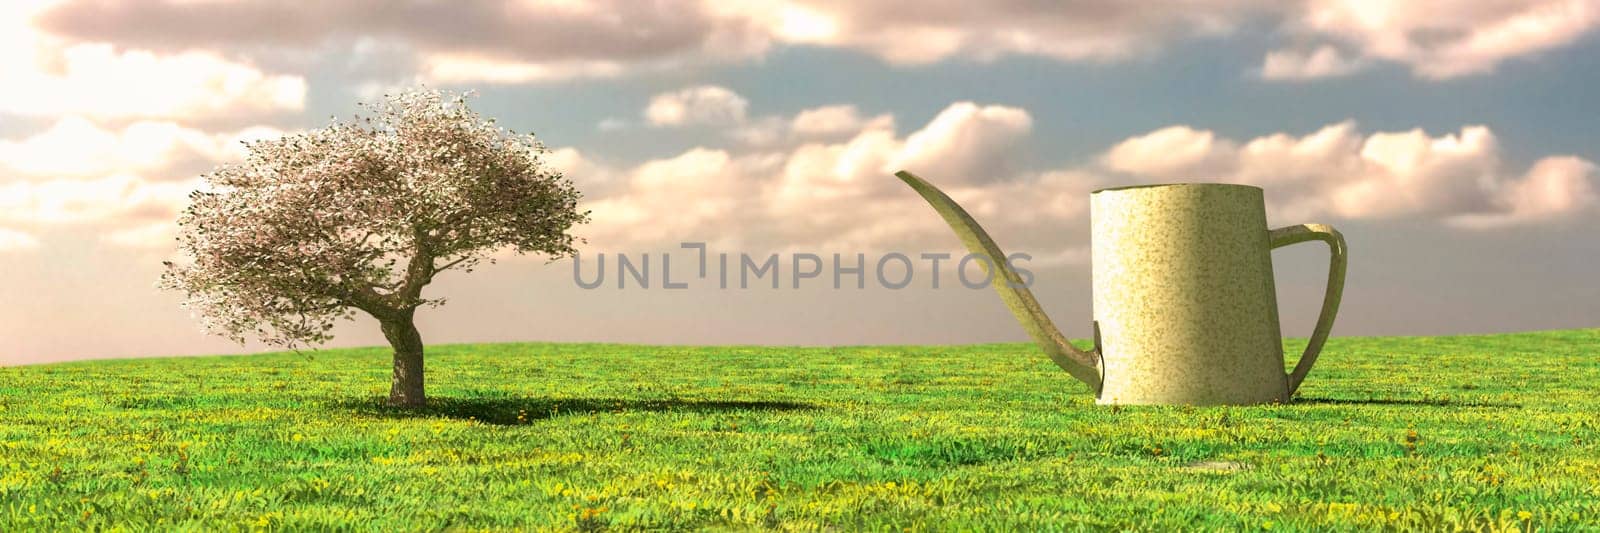 Spring's Gentle Embrace: Blossoming Tree and Watering Can in a Surreal Landscape by Juanjo39